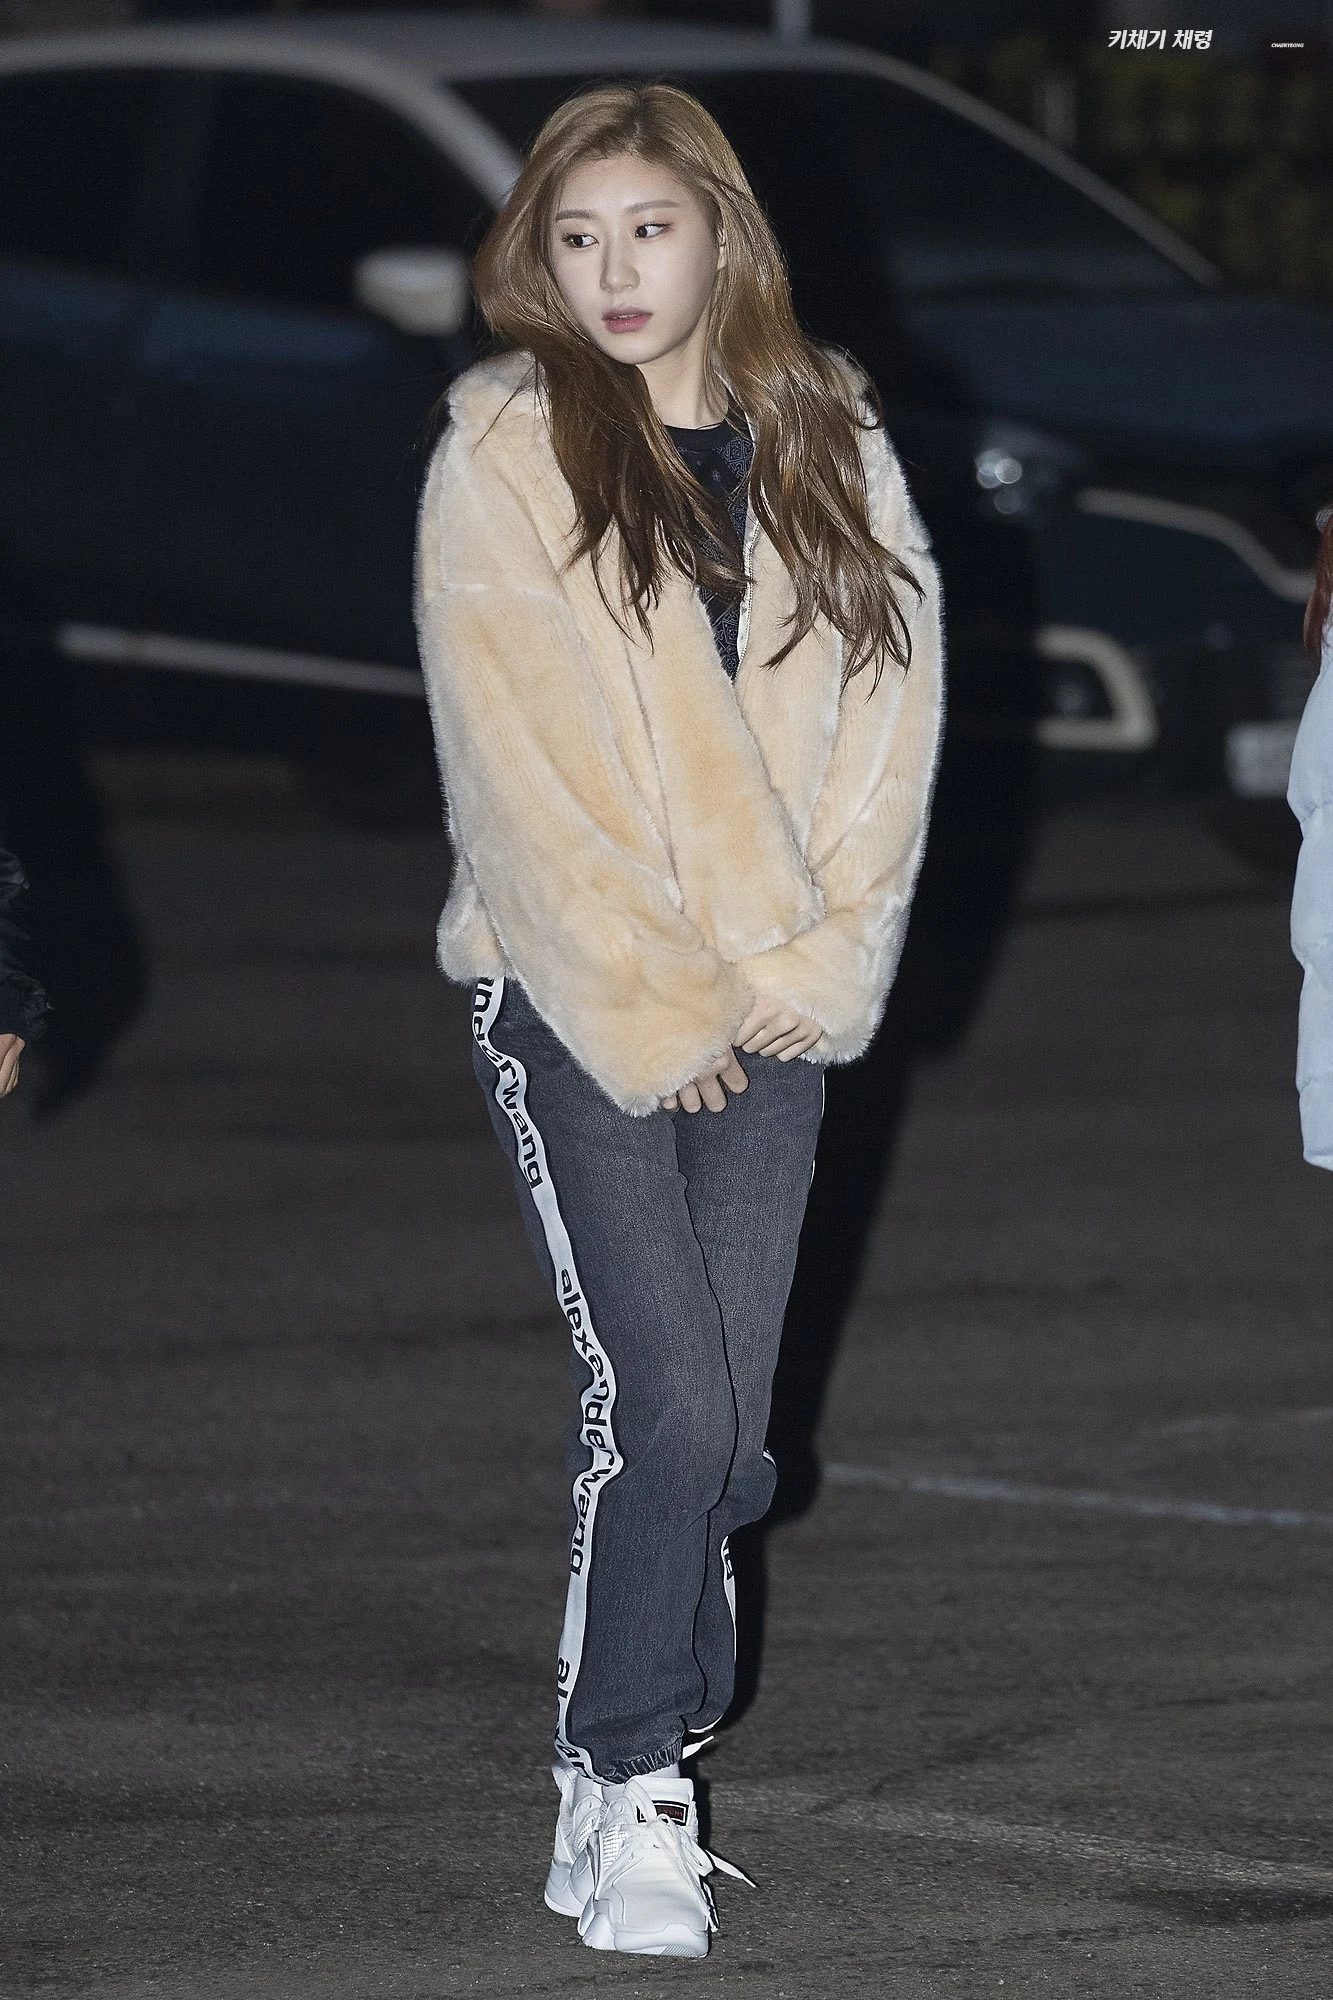 10-fashion-tips-itzy-chaeryeong-airport-style-7